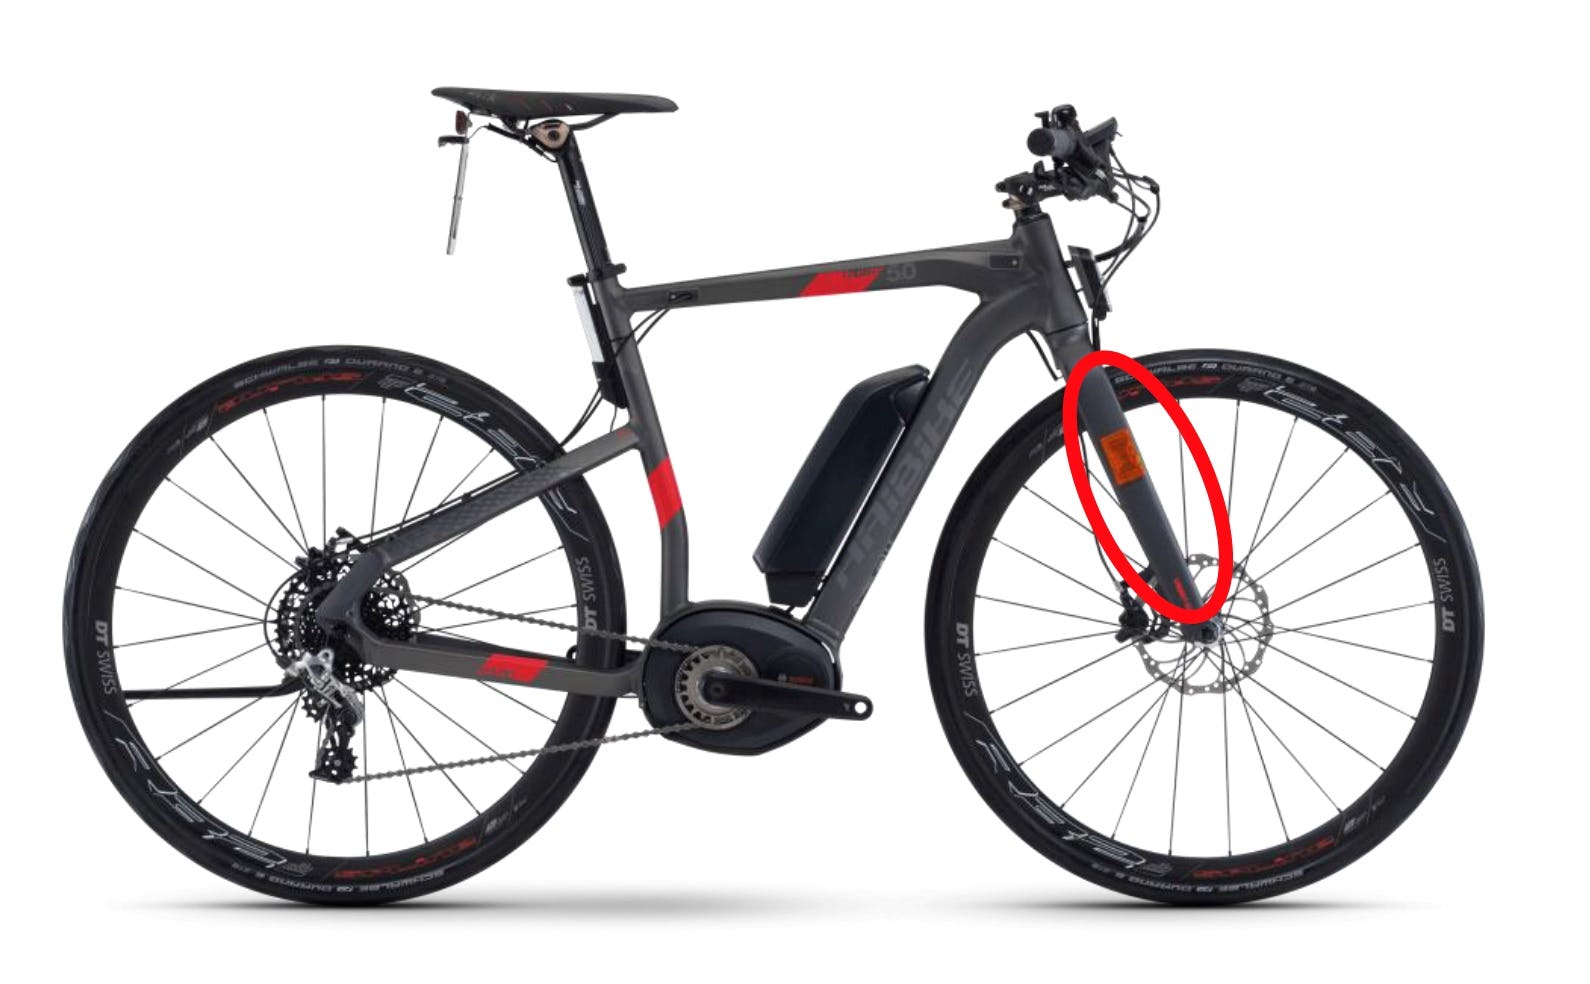 ‘Xduro’ e-performance models have been recalled due to front fork problems. – Photo Winora